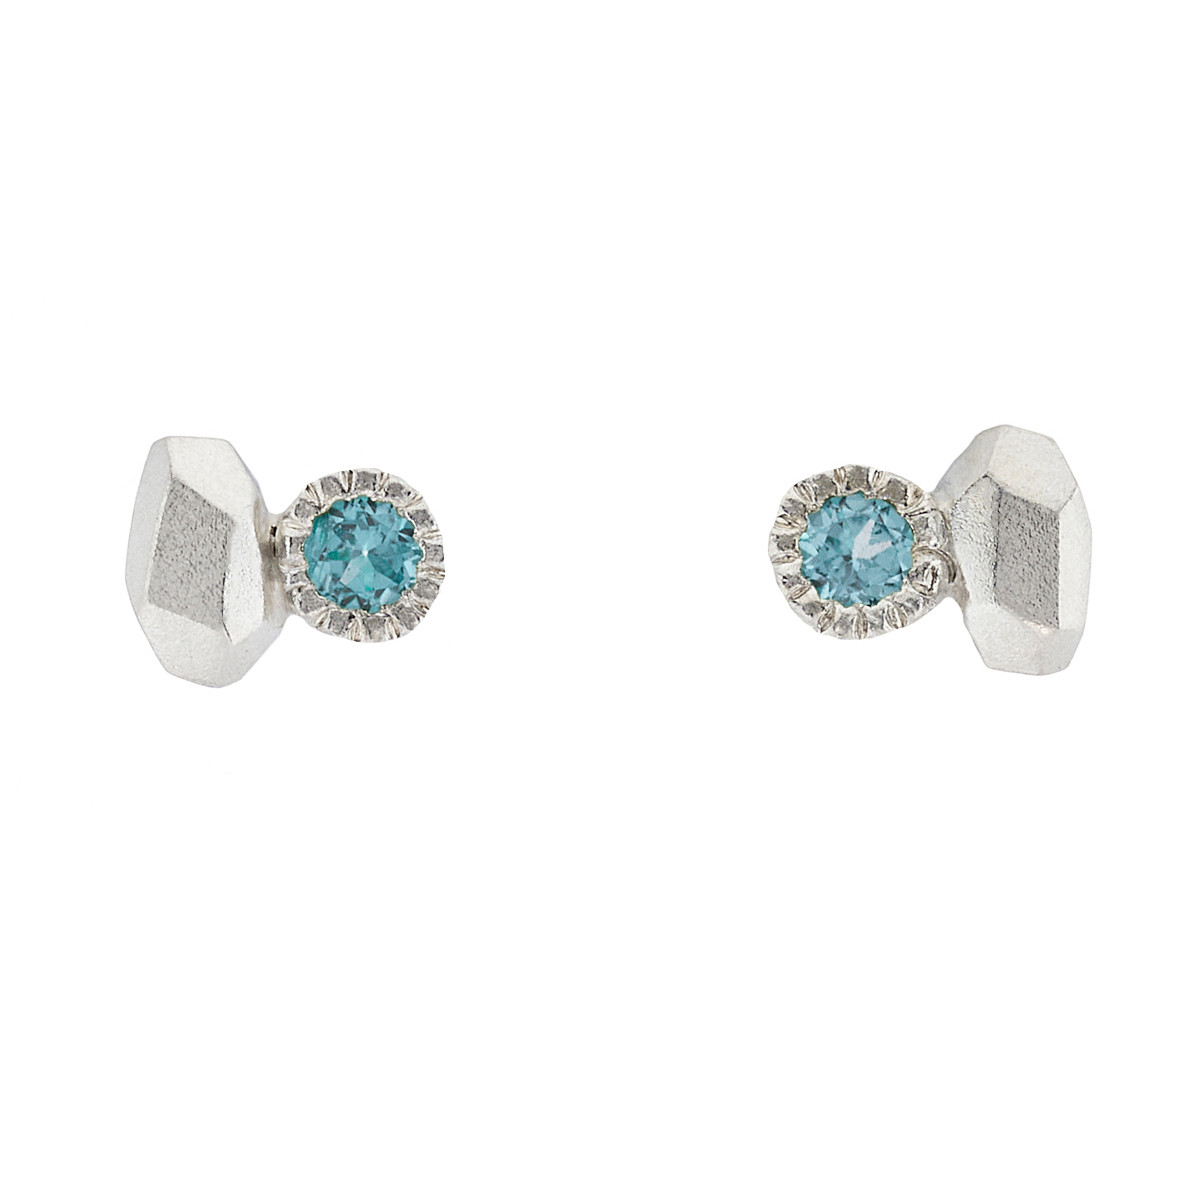 Silver Duo Mini Studs with Blue Topaz, Maria Manola, tomfoolery